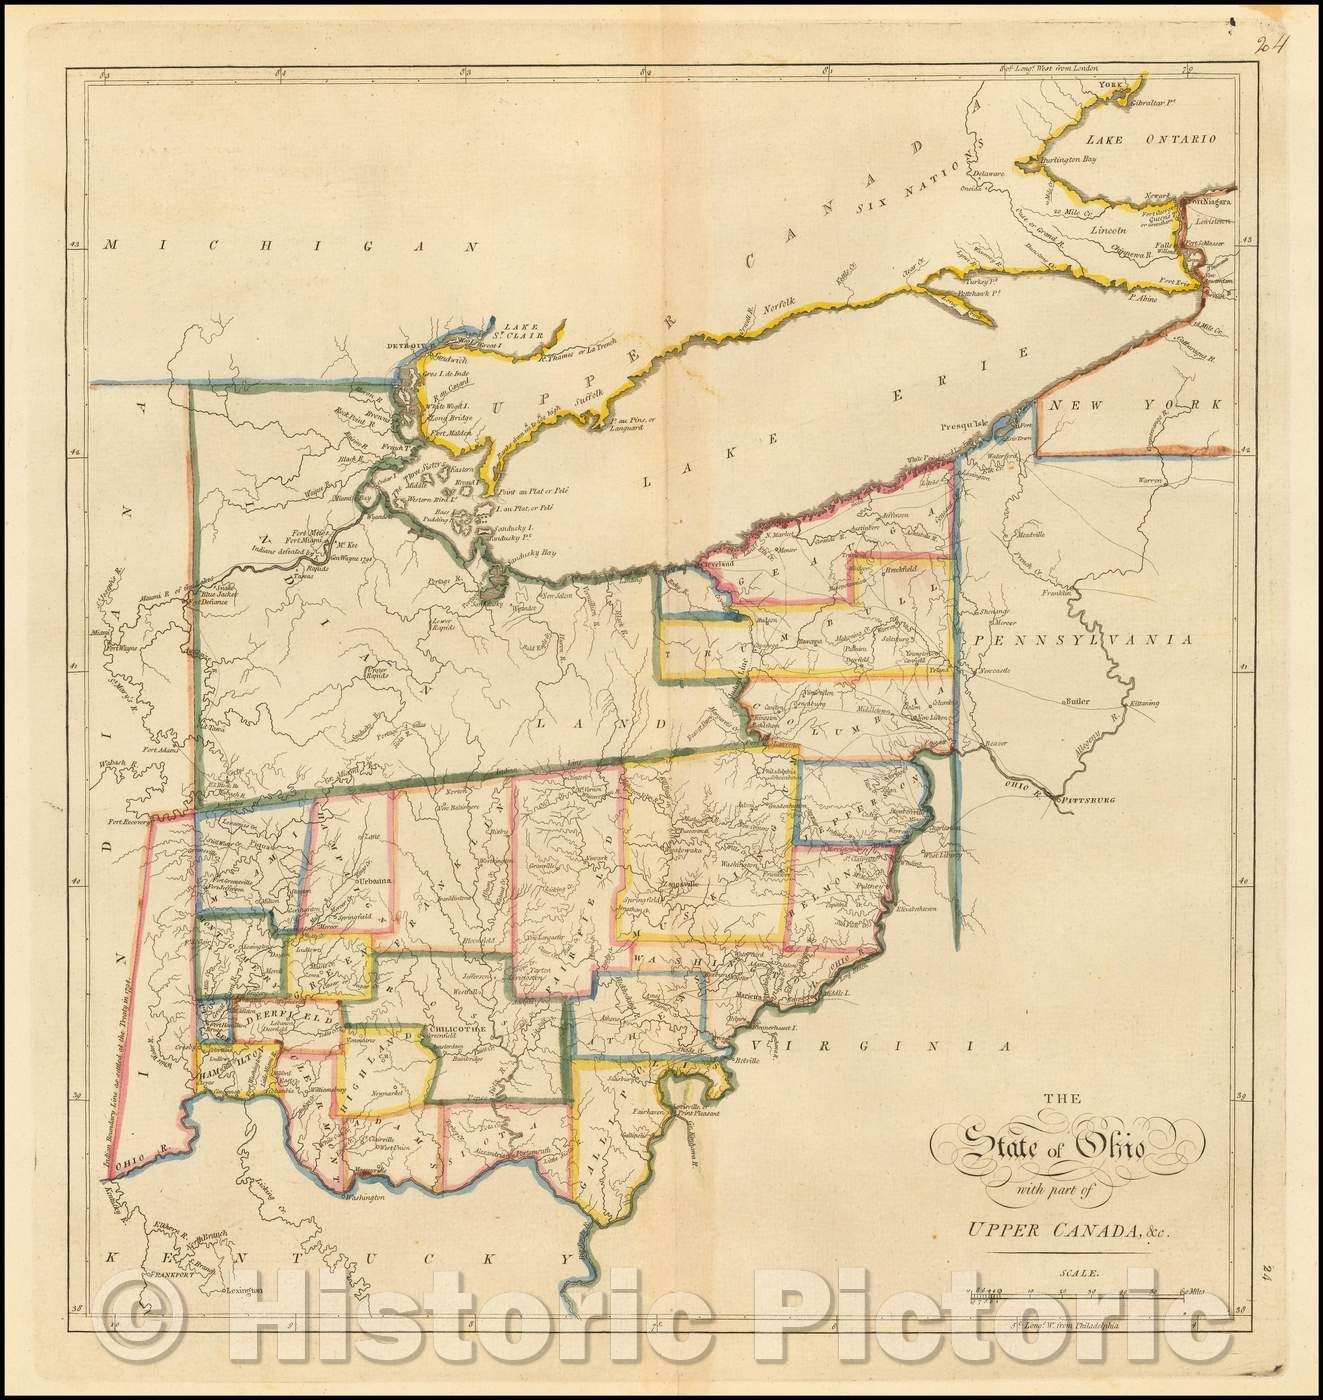 Historic Map - The State of Ohio with part of Upper Canada, 1814, Mathew Carey - Vintage Wall Art